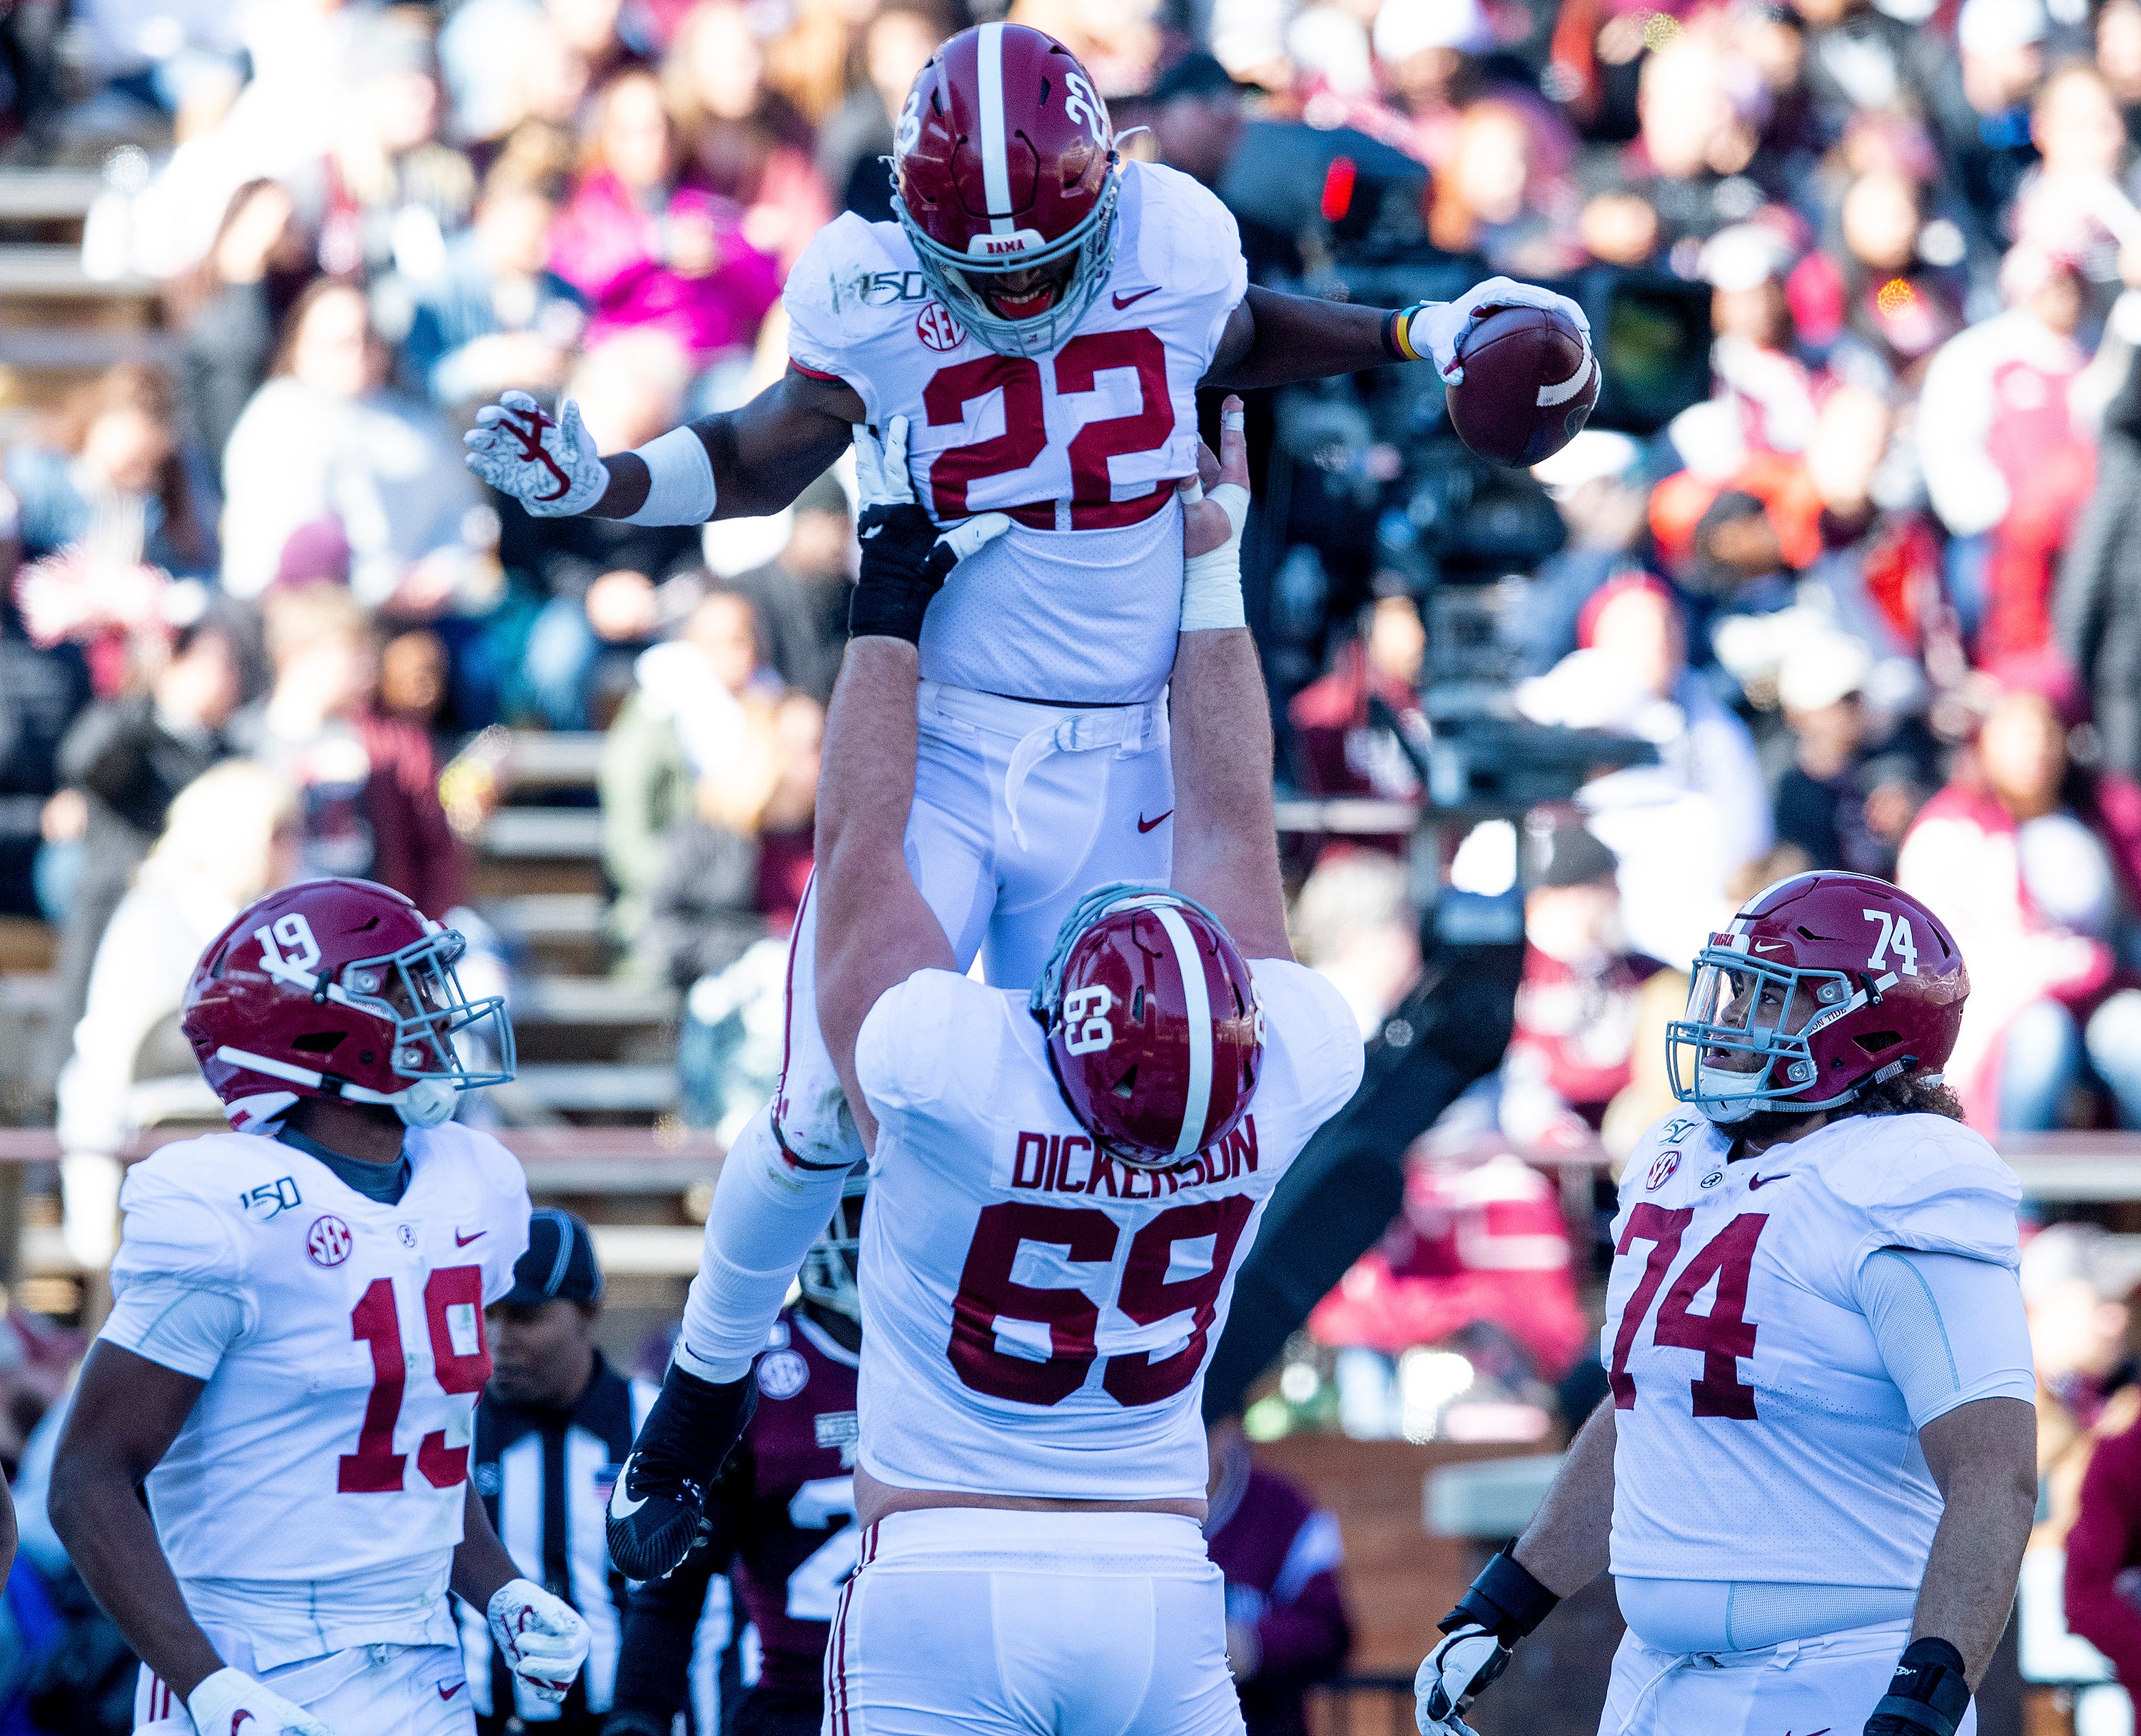 Alabama running back Najee Harris (22) is lifted by offensive lineman Landon Dickerson (69) after scoring against Mississippi State at Davis Wade Stadium on the MSU campus in Starkville, Ms., on Saturday November 16, 2019.